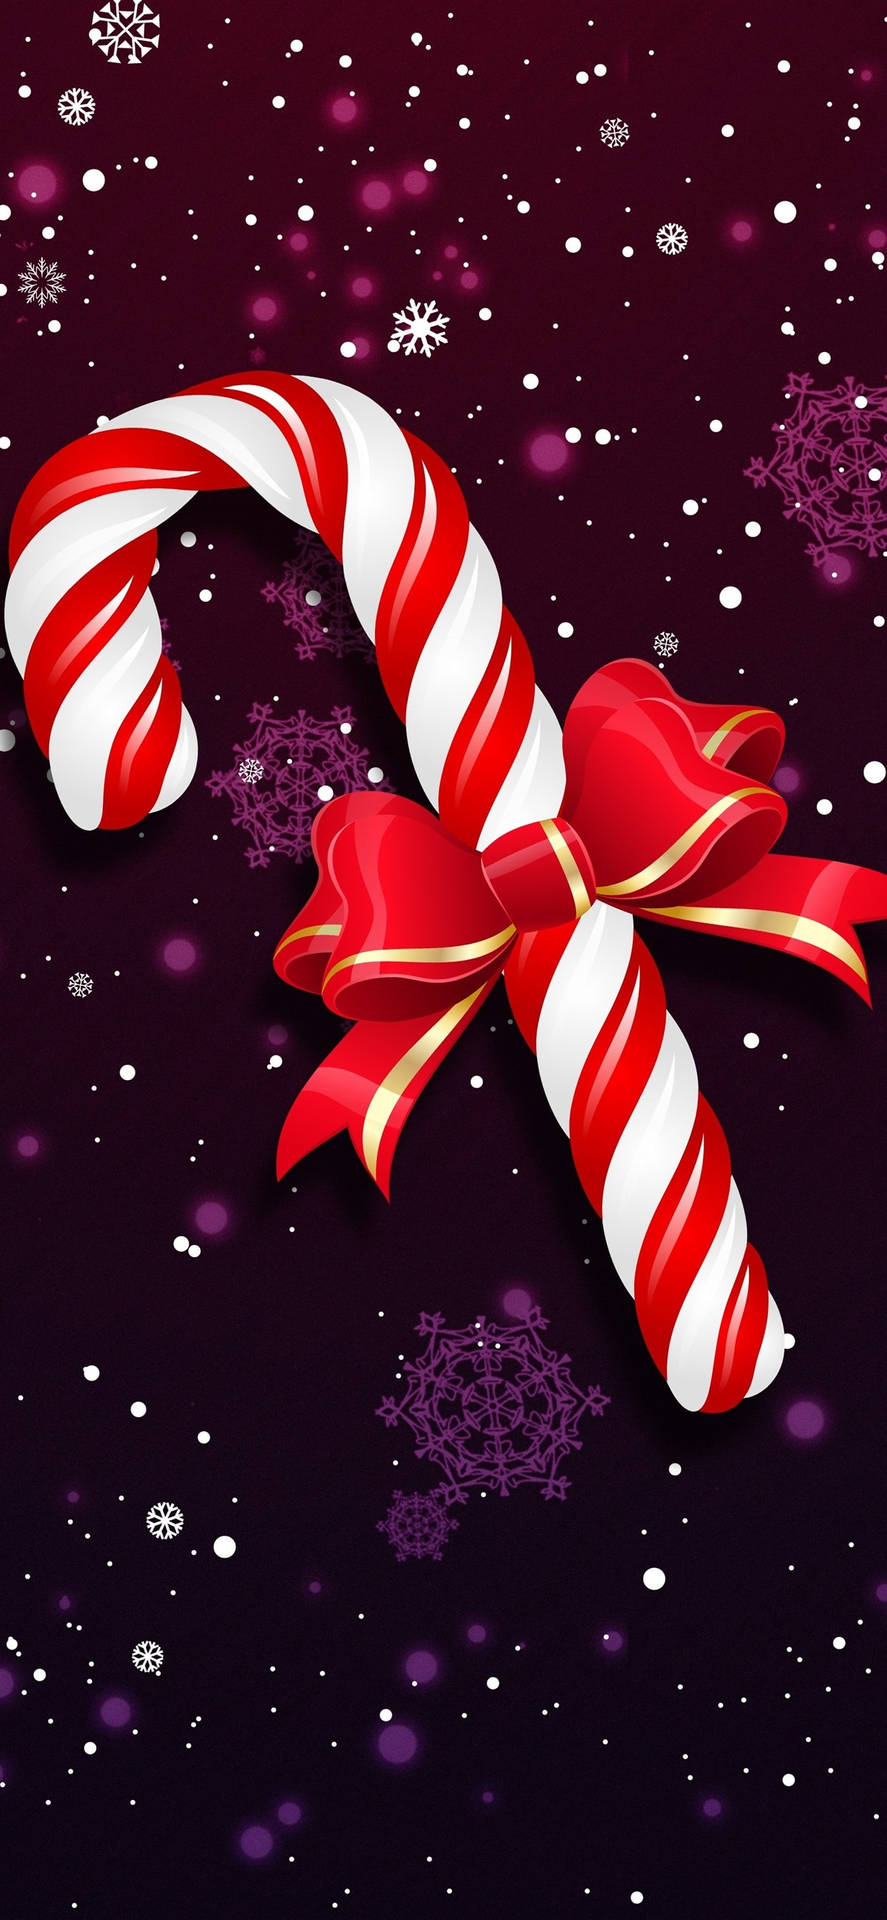 Christmas Candy Cane Wallpapers